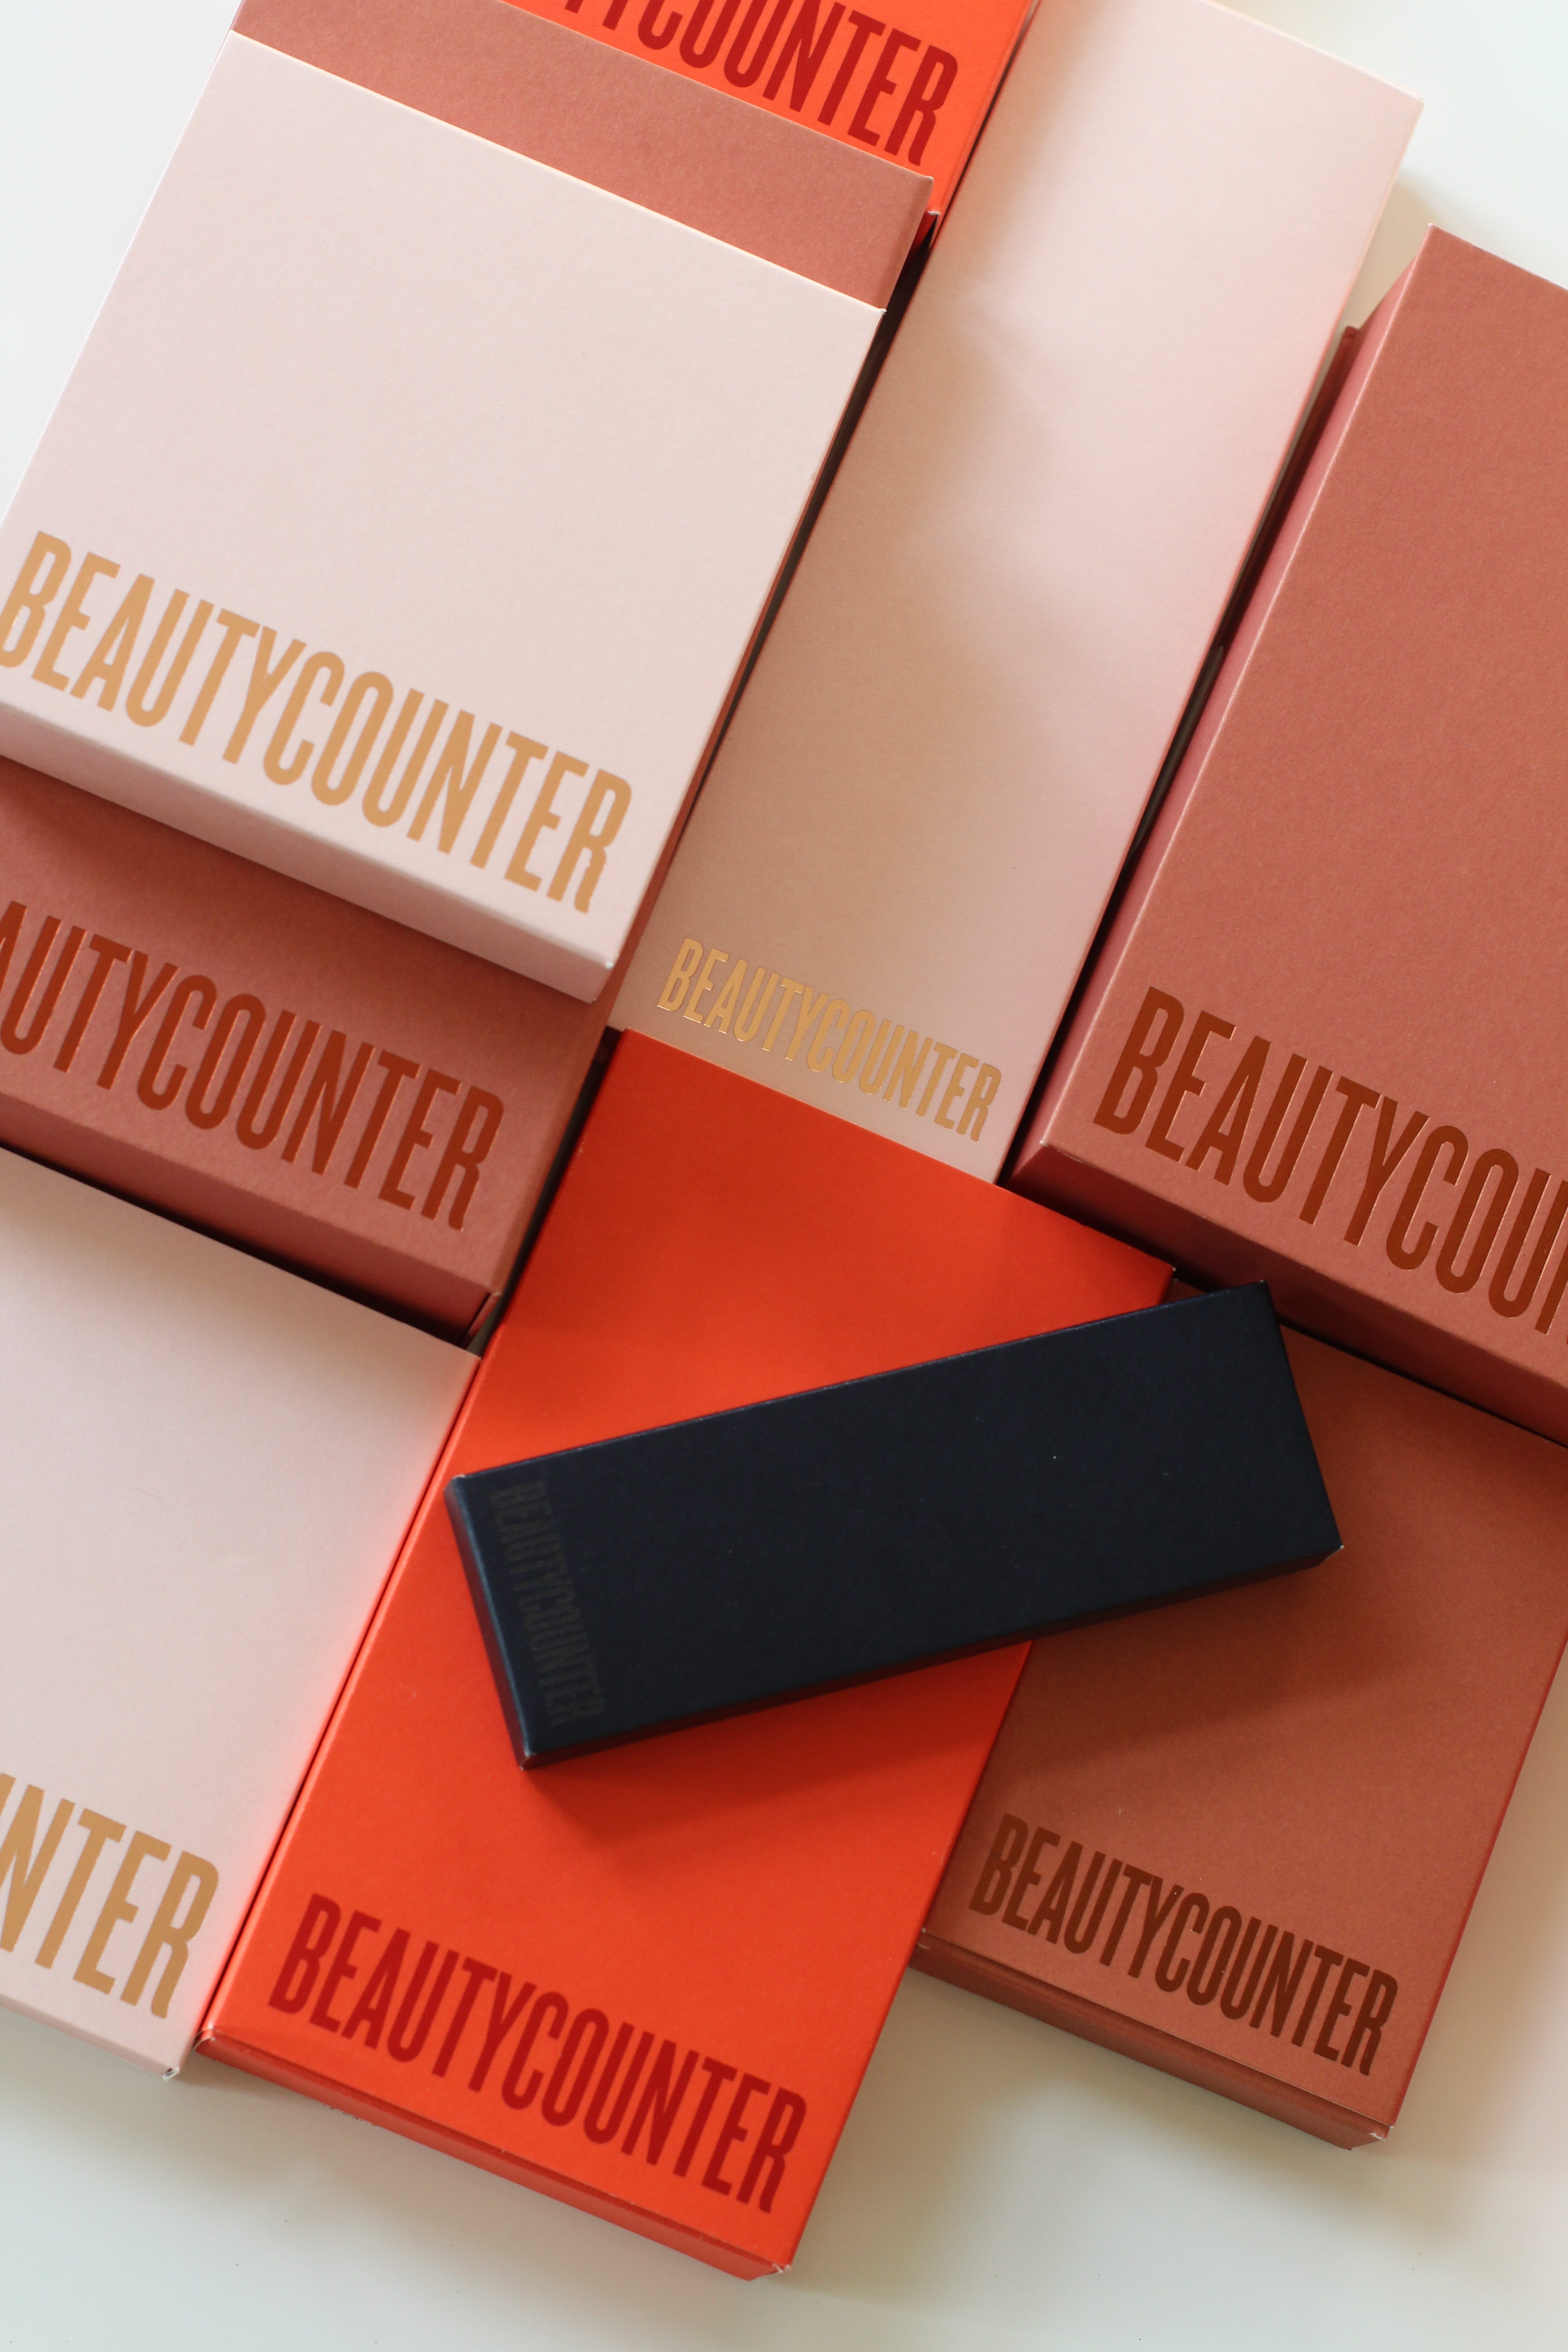 Beautycounter holiday collection. Clean beauty gift sets 2019